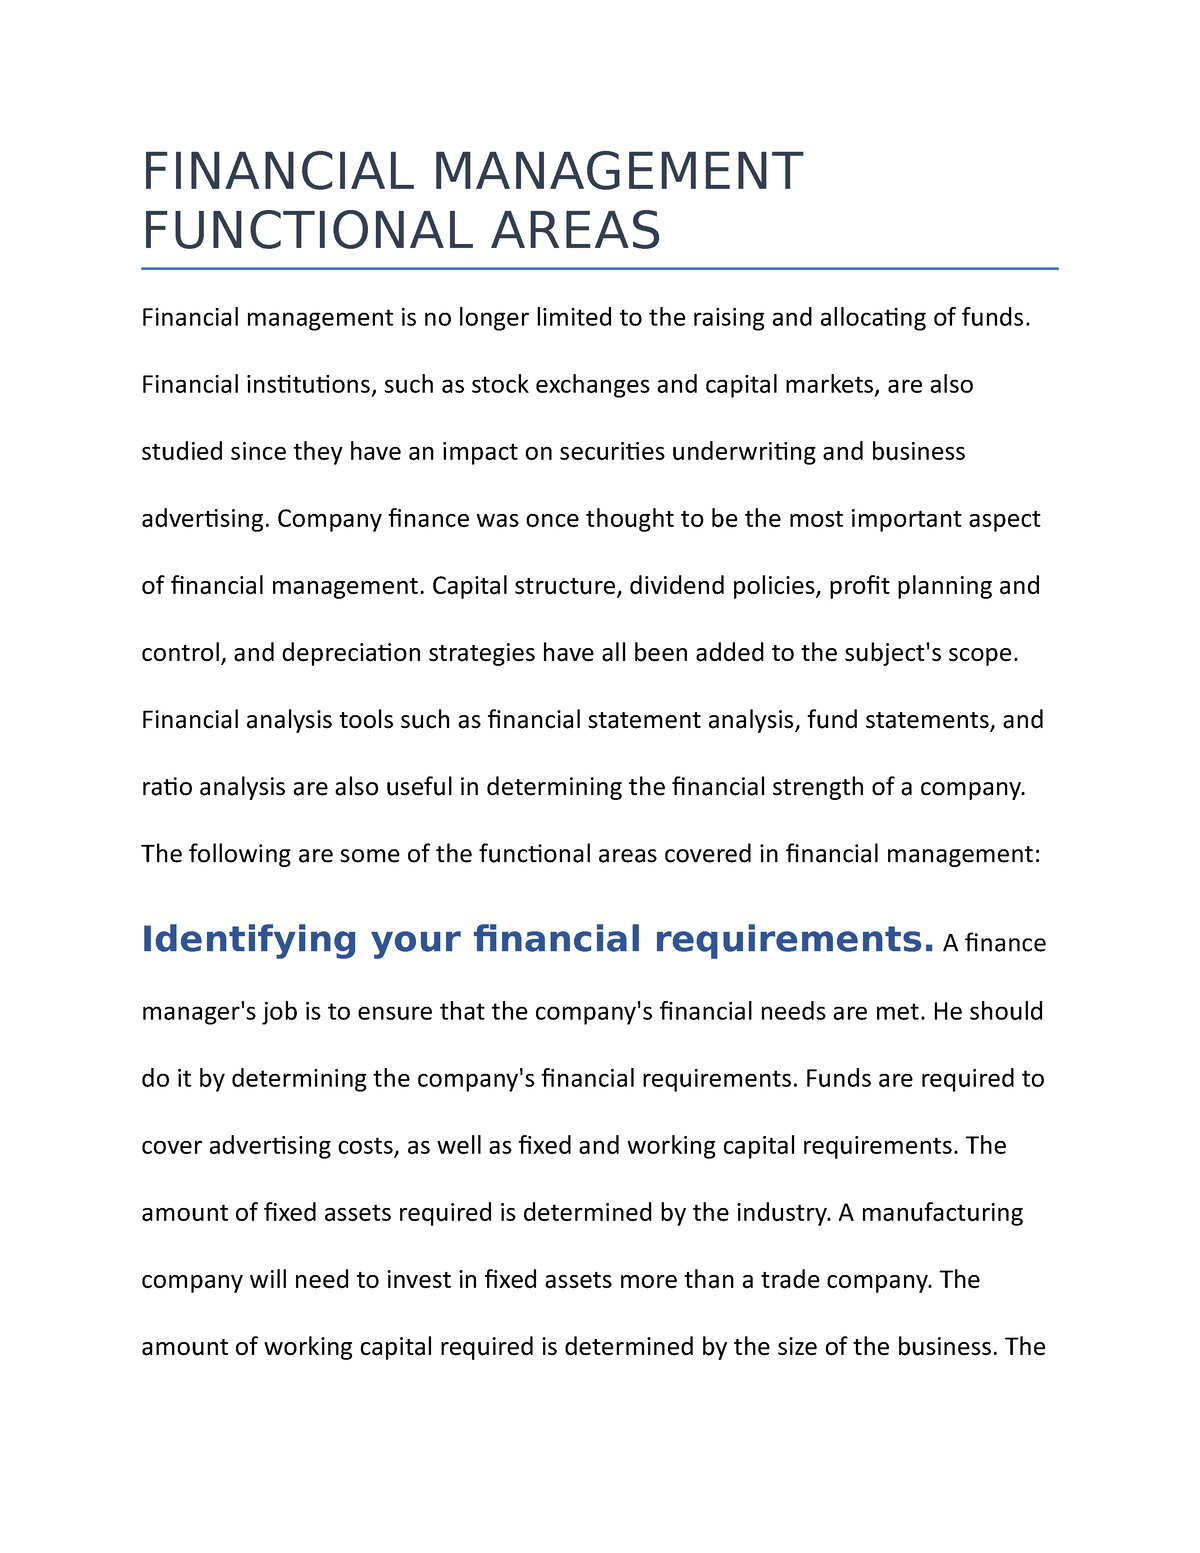 financial-management-functional-areas-financial-management-functional